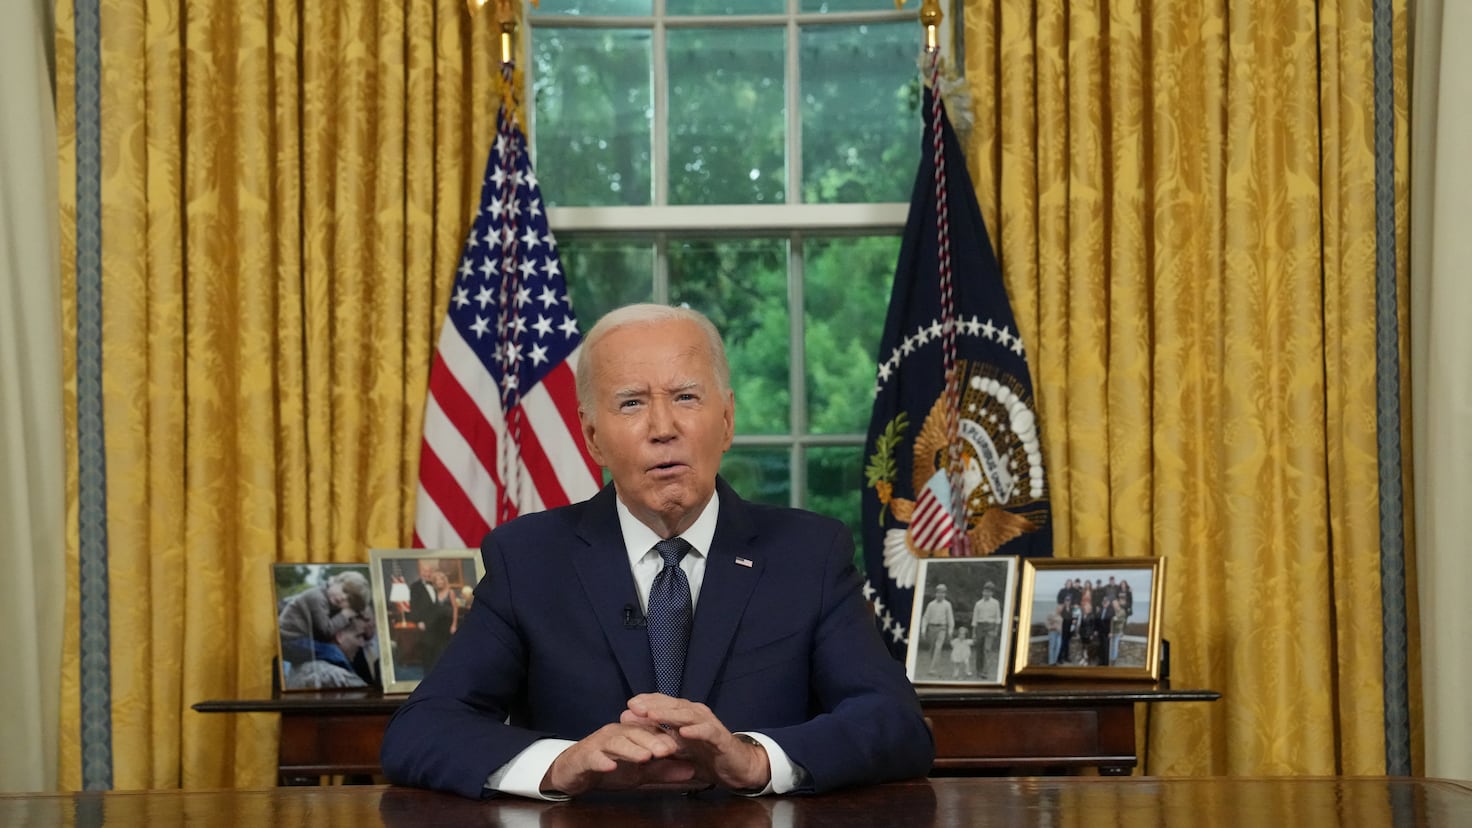 Biden calls for respect for democracy after Trump assassination: We are not enemies